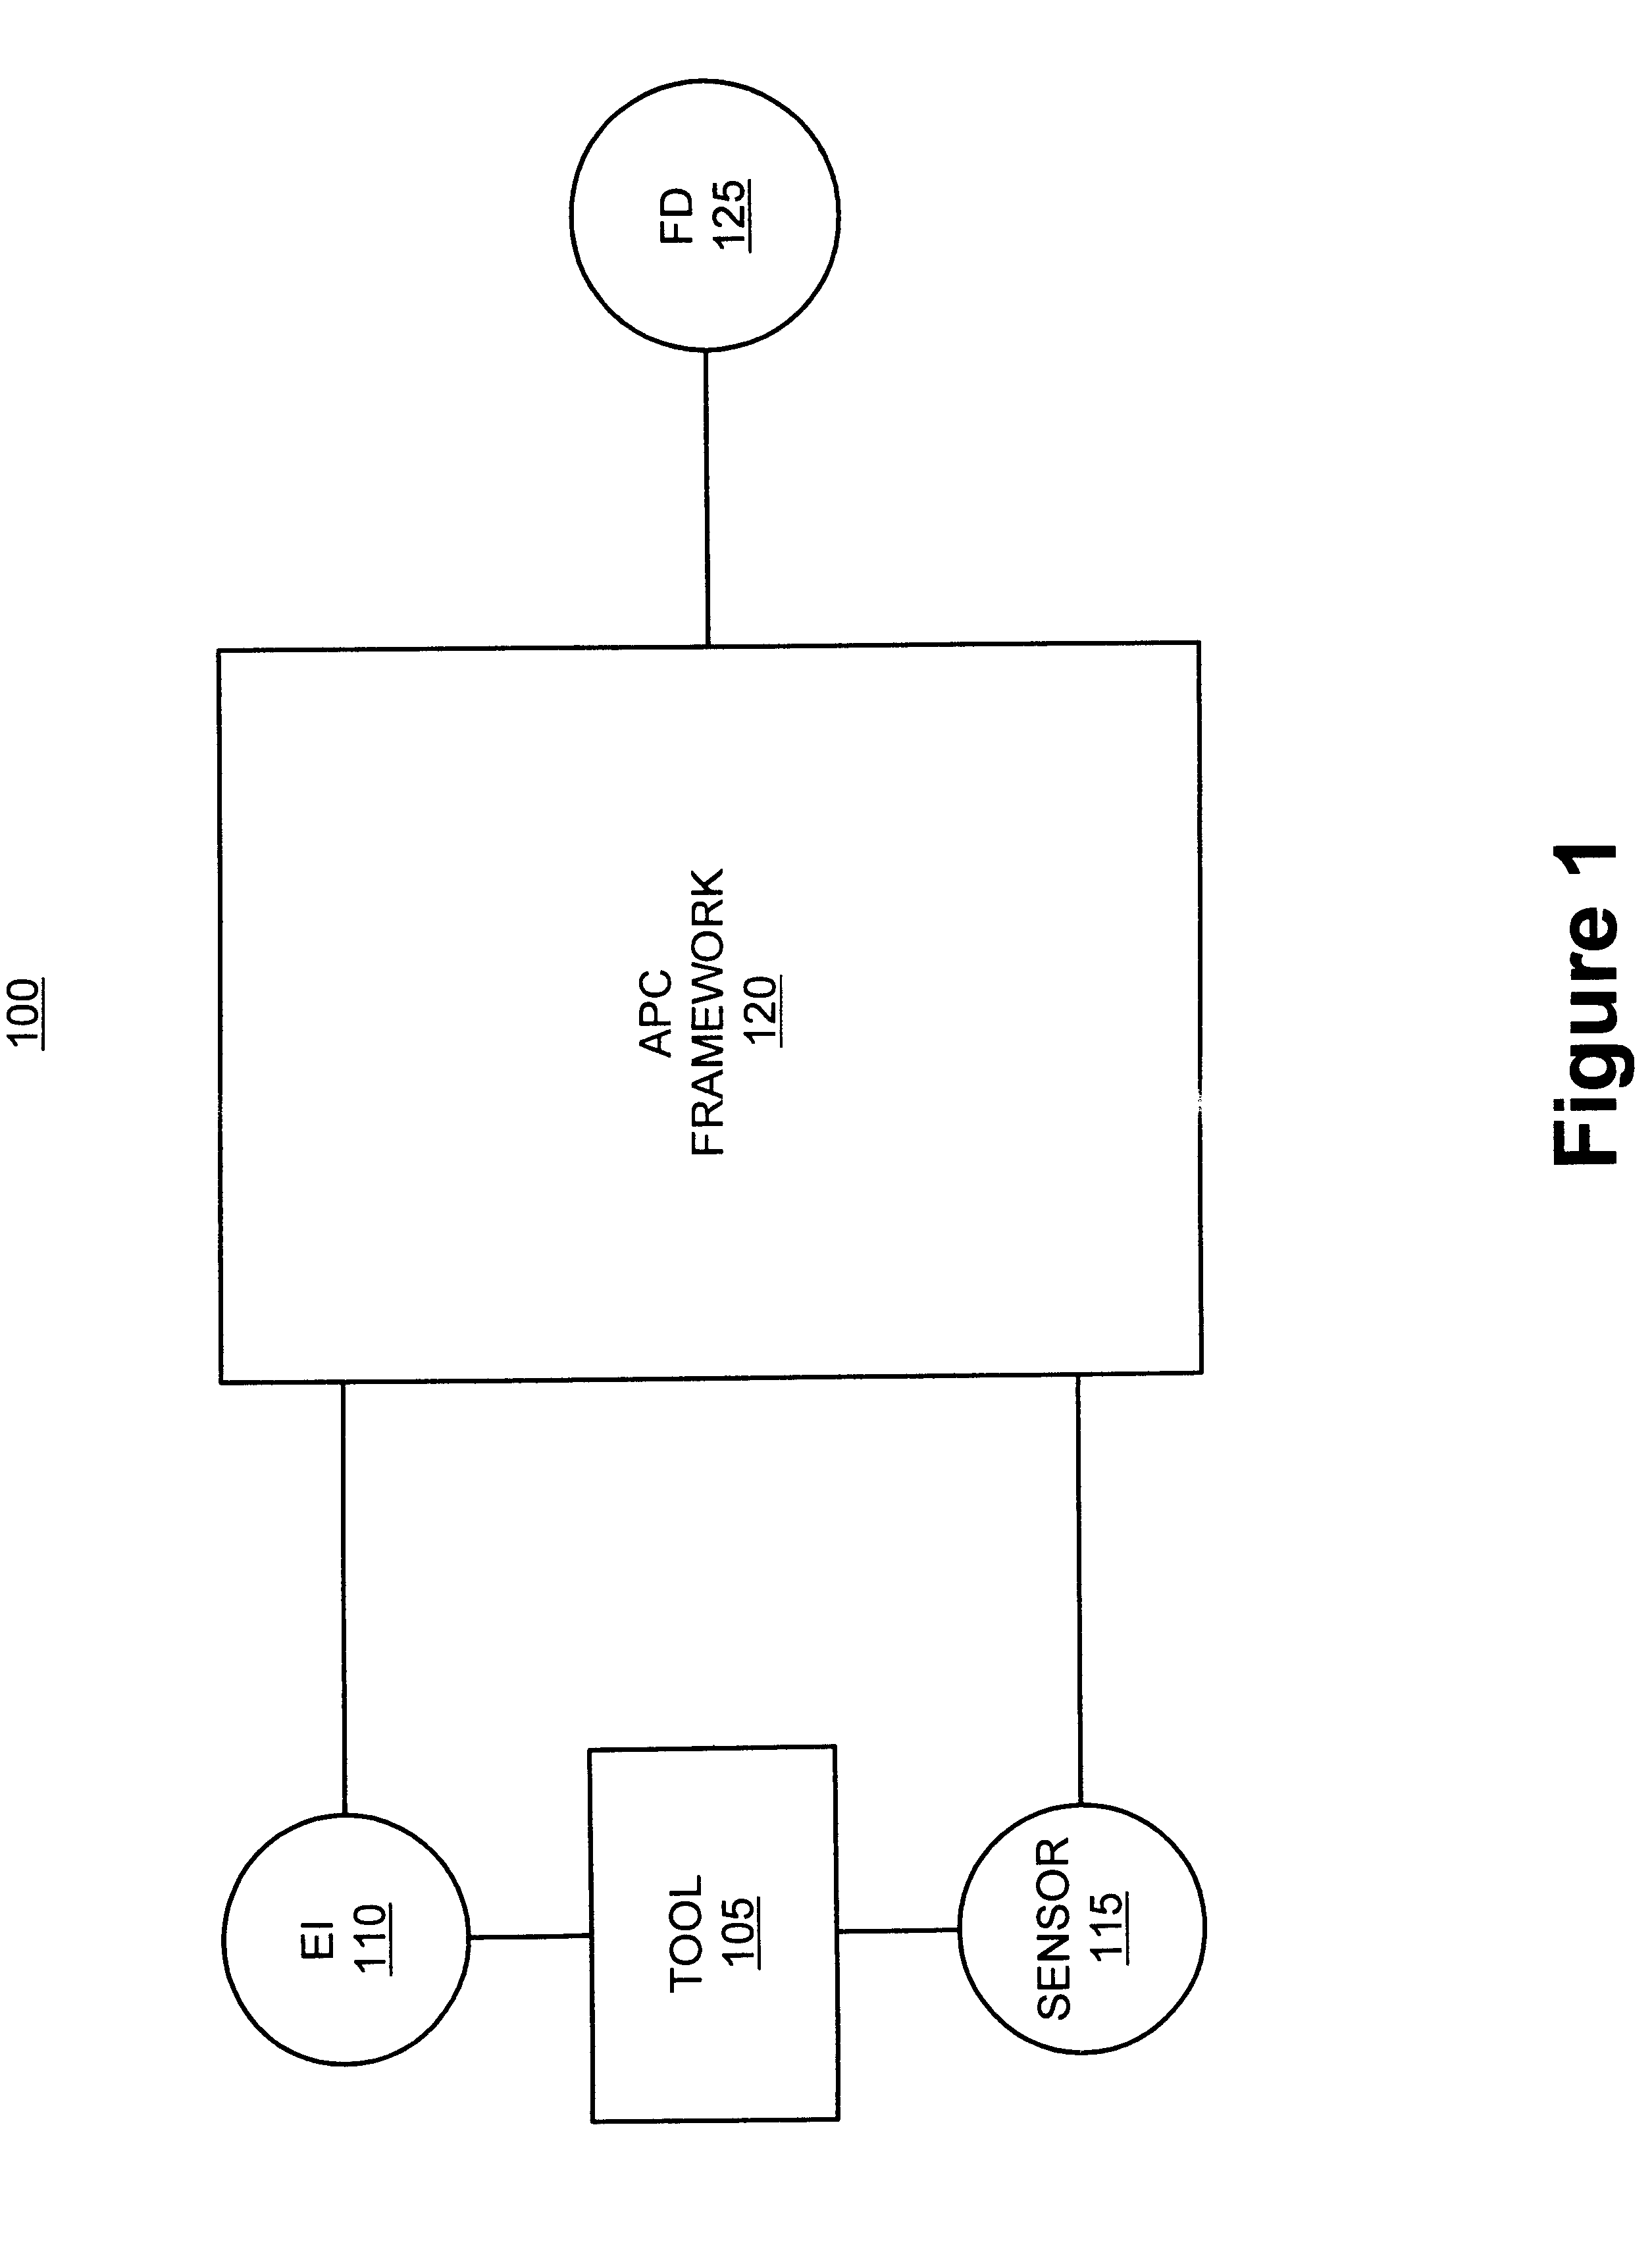 Method and apparatus for fault detection of a processing tool in an advanced process control (APC) framework